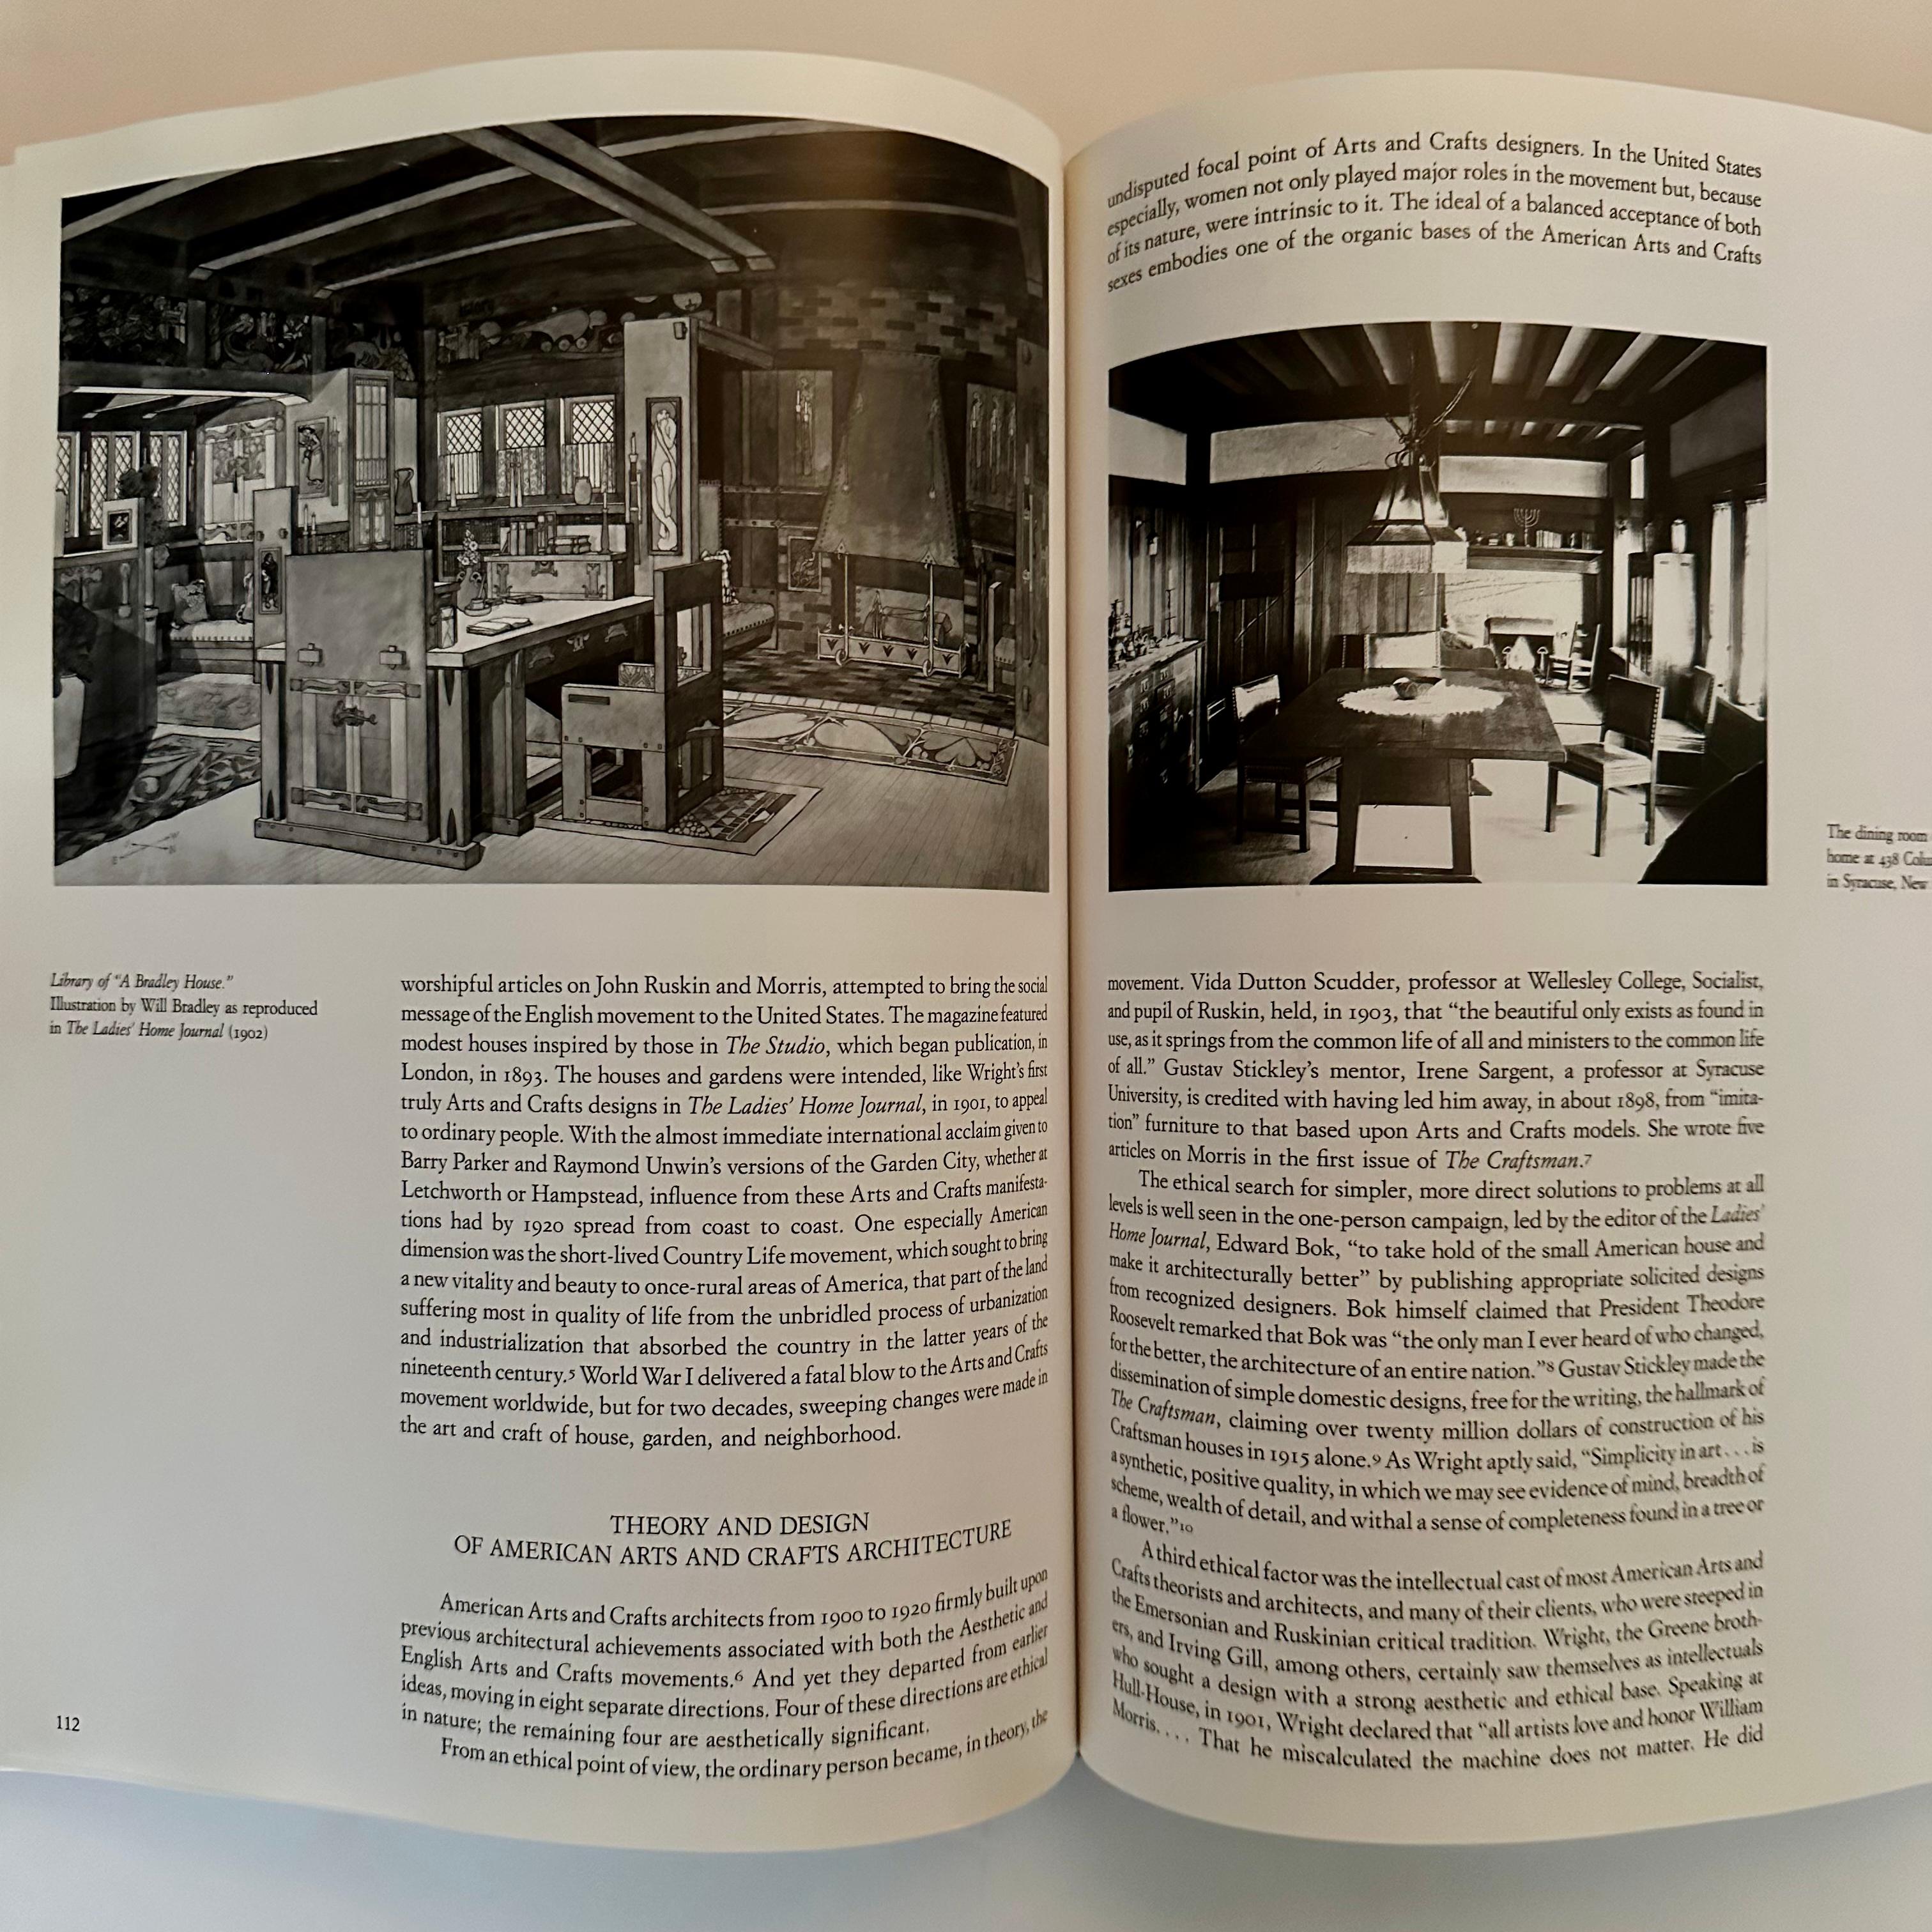 Late 20th Century The Ideal Home - The History of Twentieth-Century American Craft 1900-1920